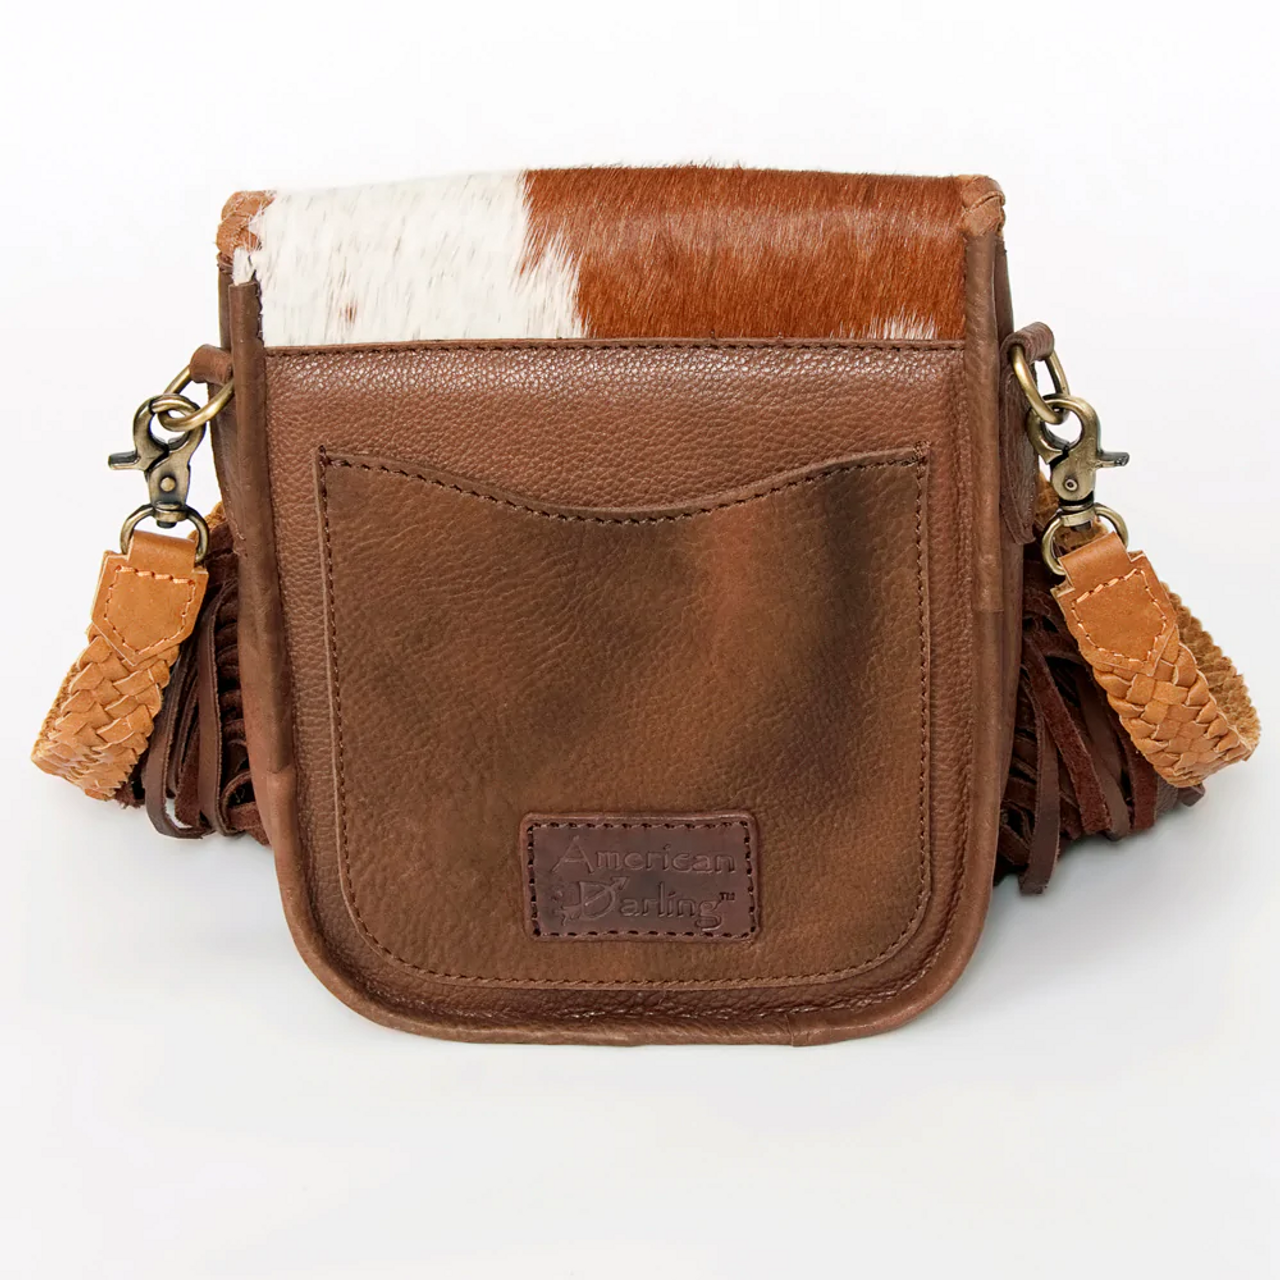 MUSTANG- LEATHER & COW HIDE PURSE WITH FRINGE – Florida Cracker Style